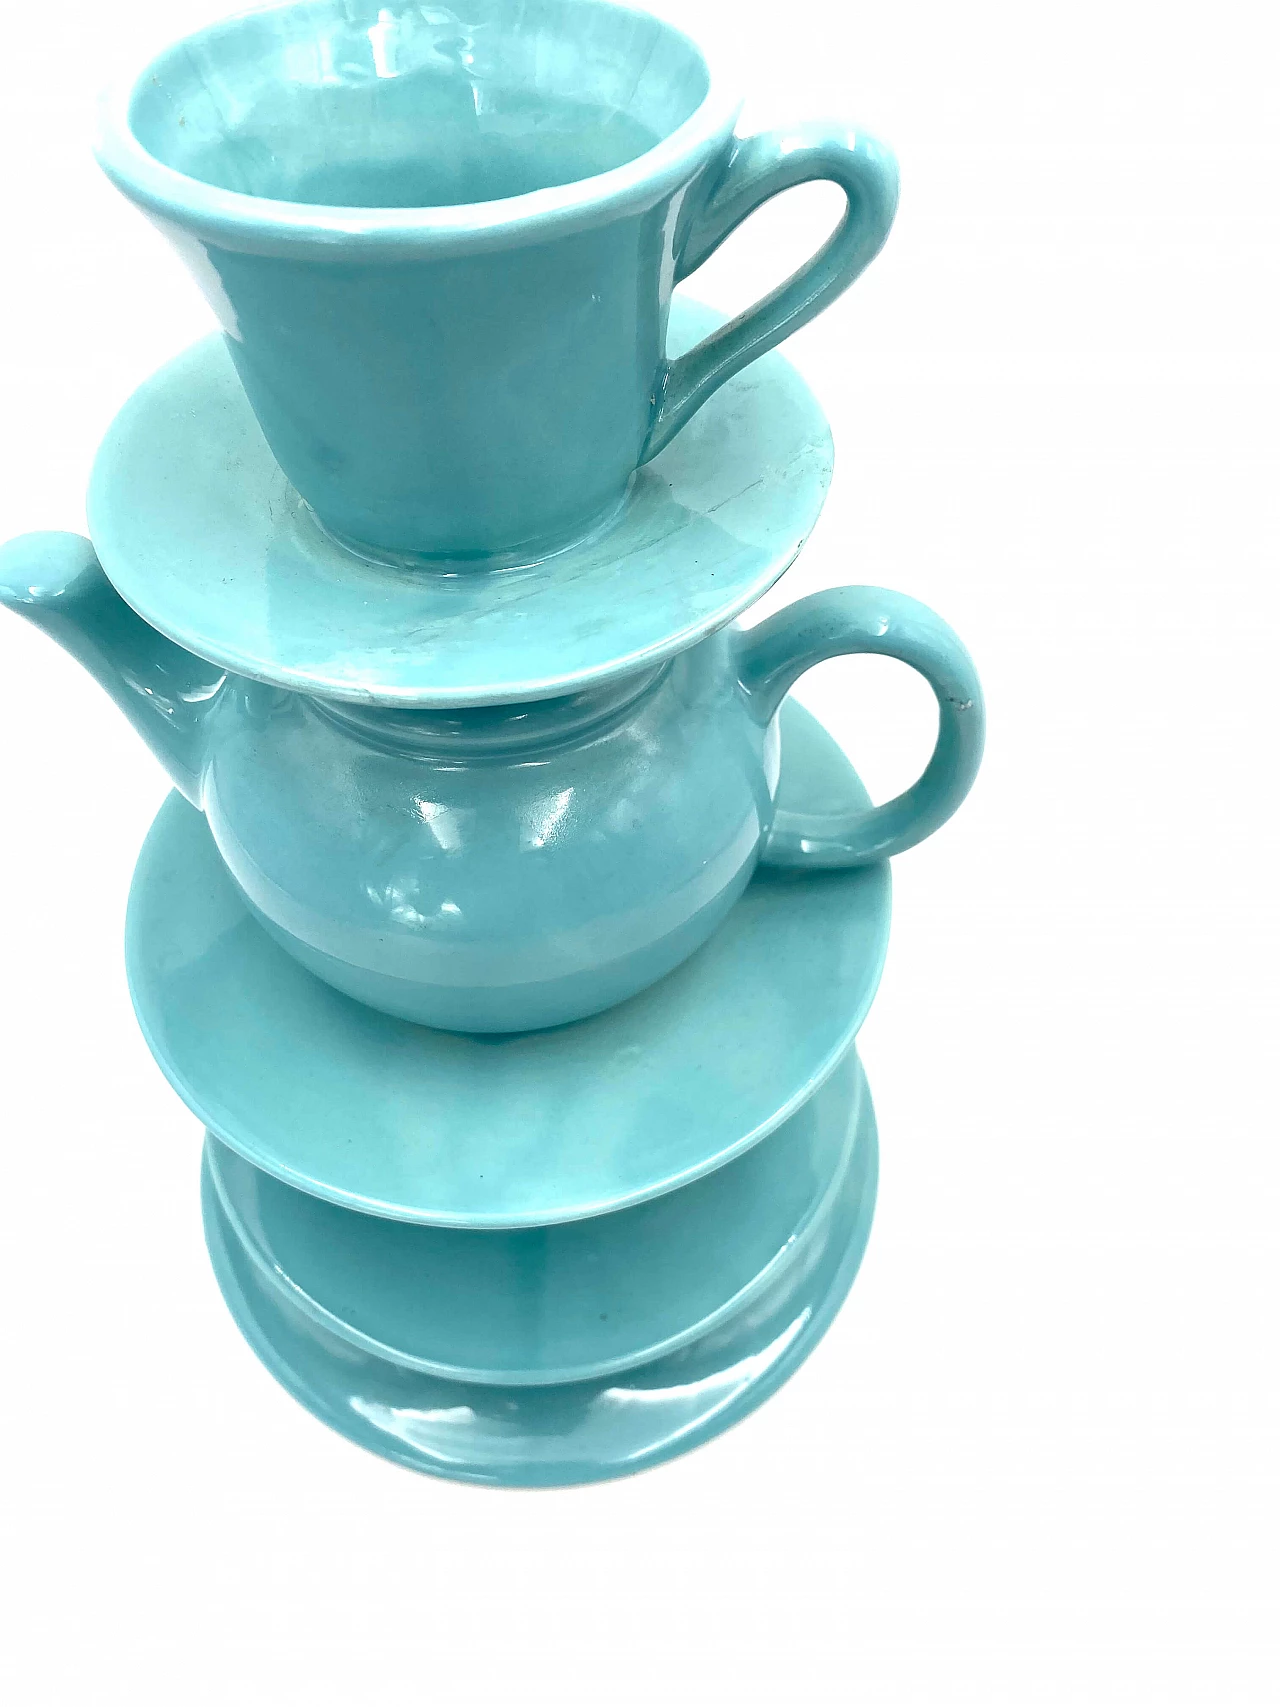 Vase in the shape of stacked blue teacups, 80s 1251803